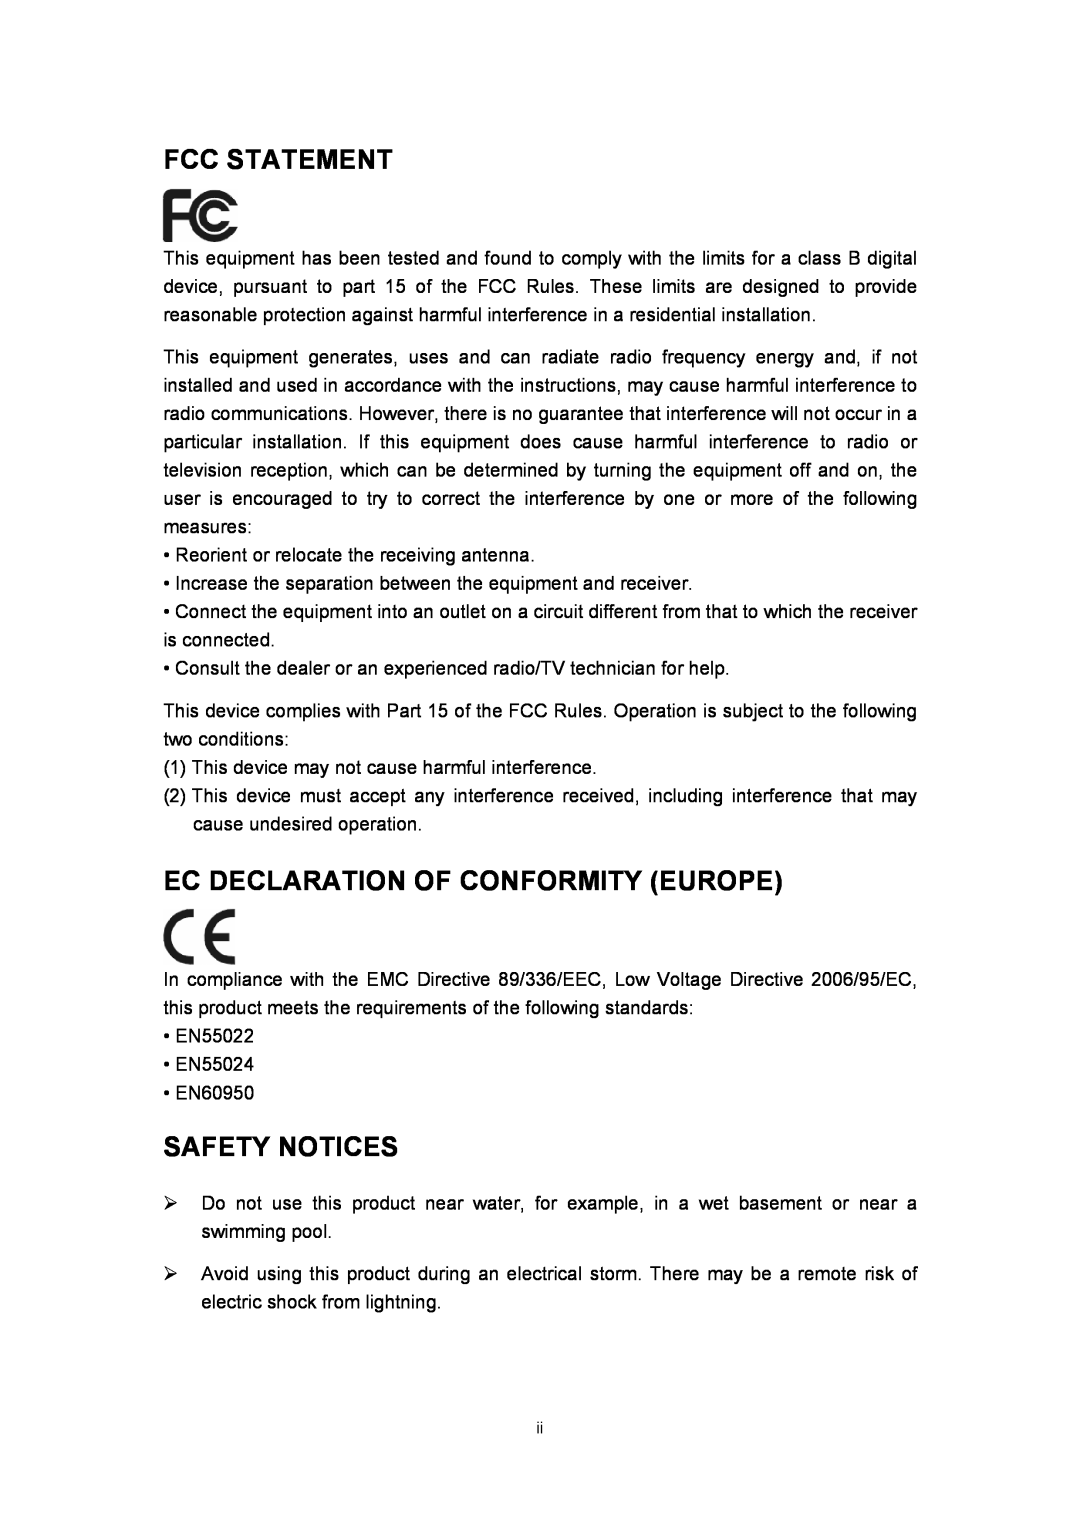 TP-Link TL-R402M manual Fcc Statement, Ec Declaration Of Conformity Europe, Safety Notices 